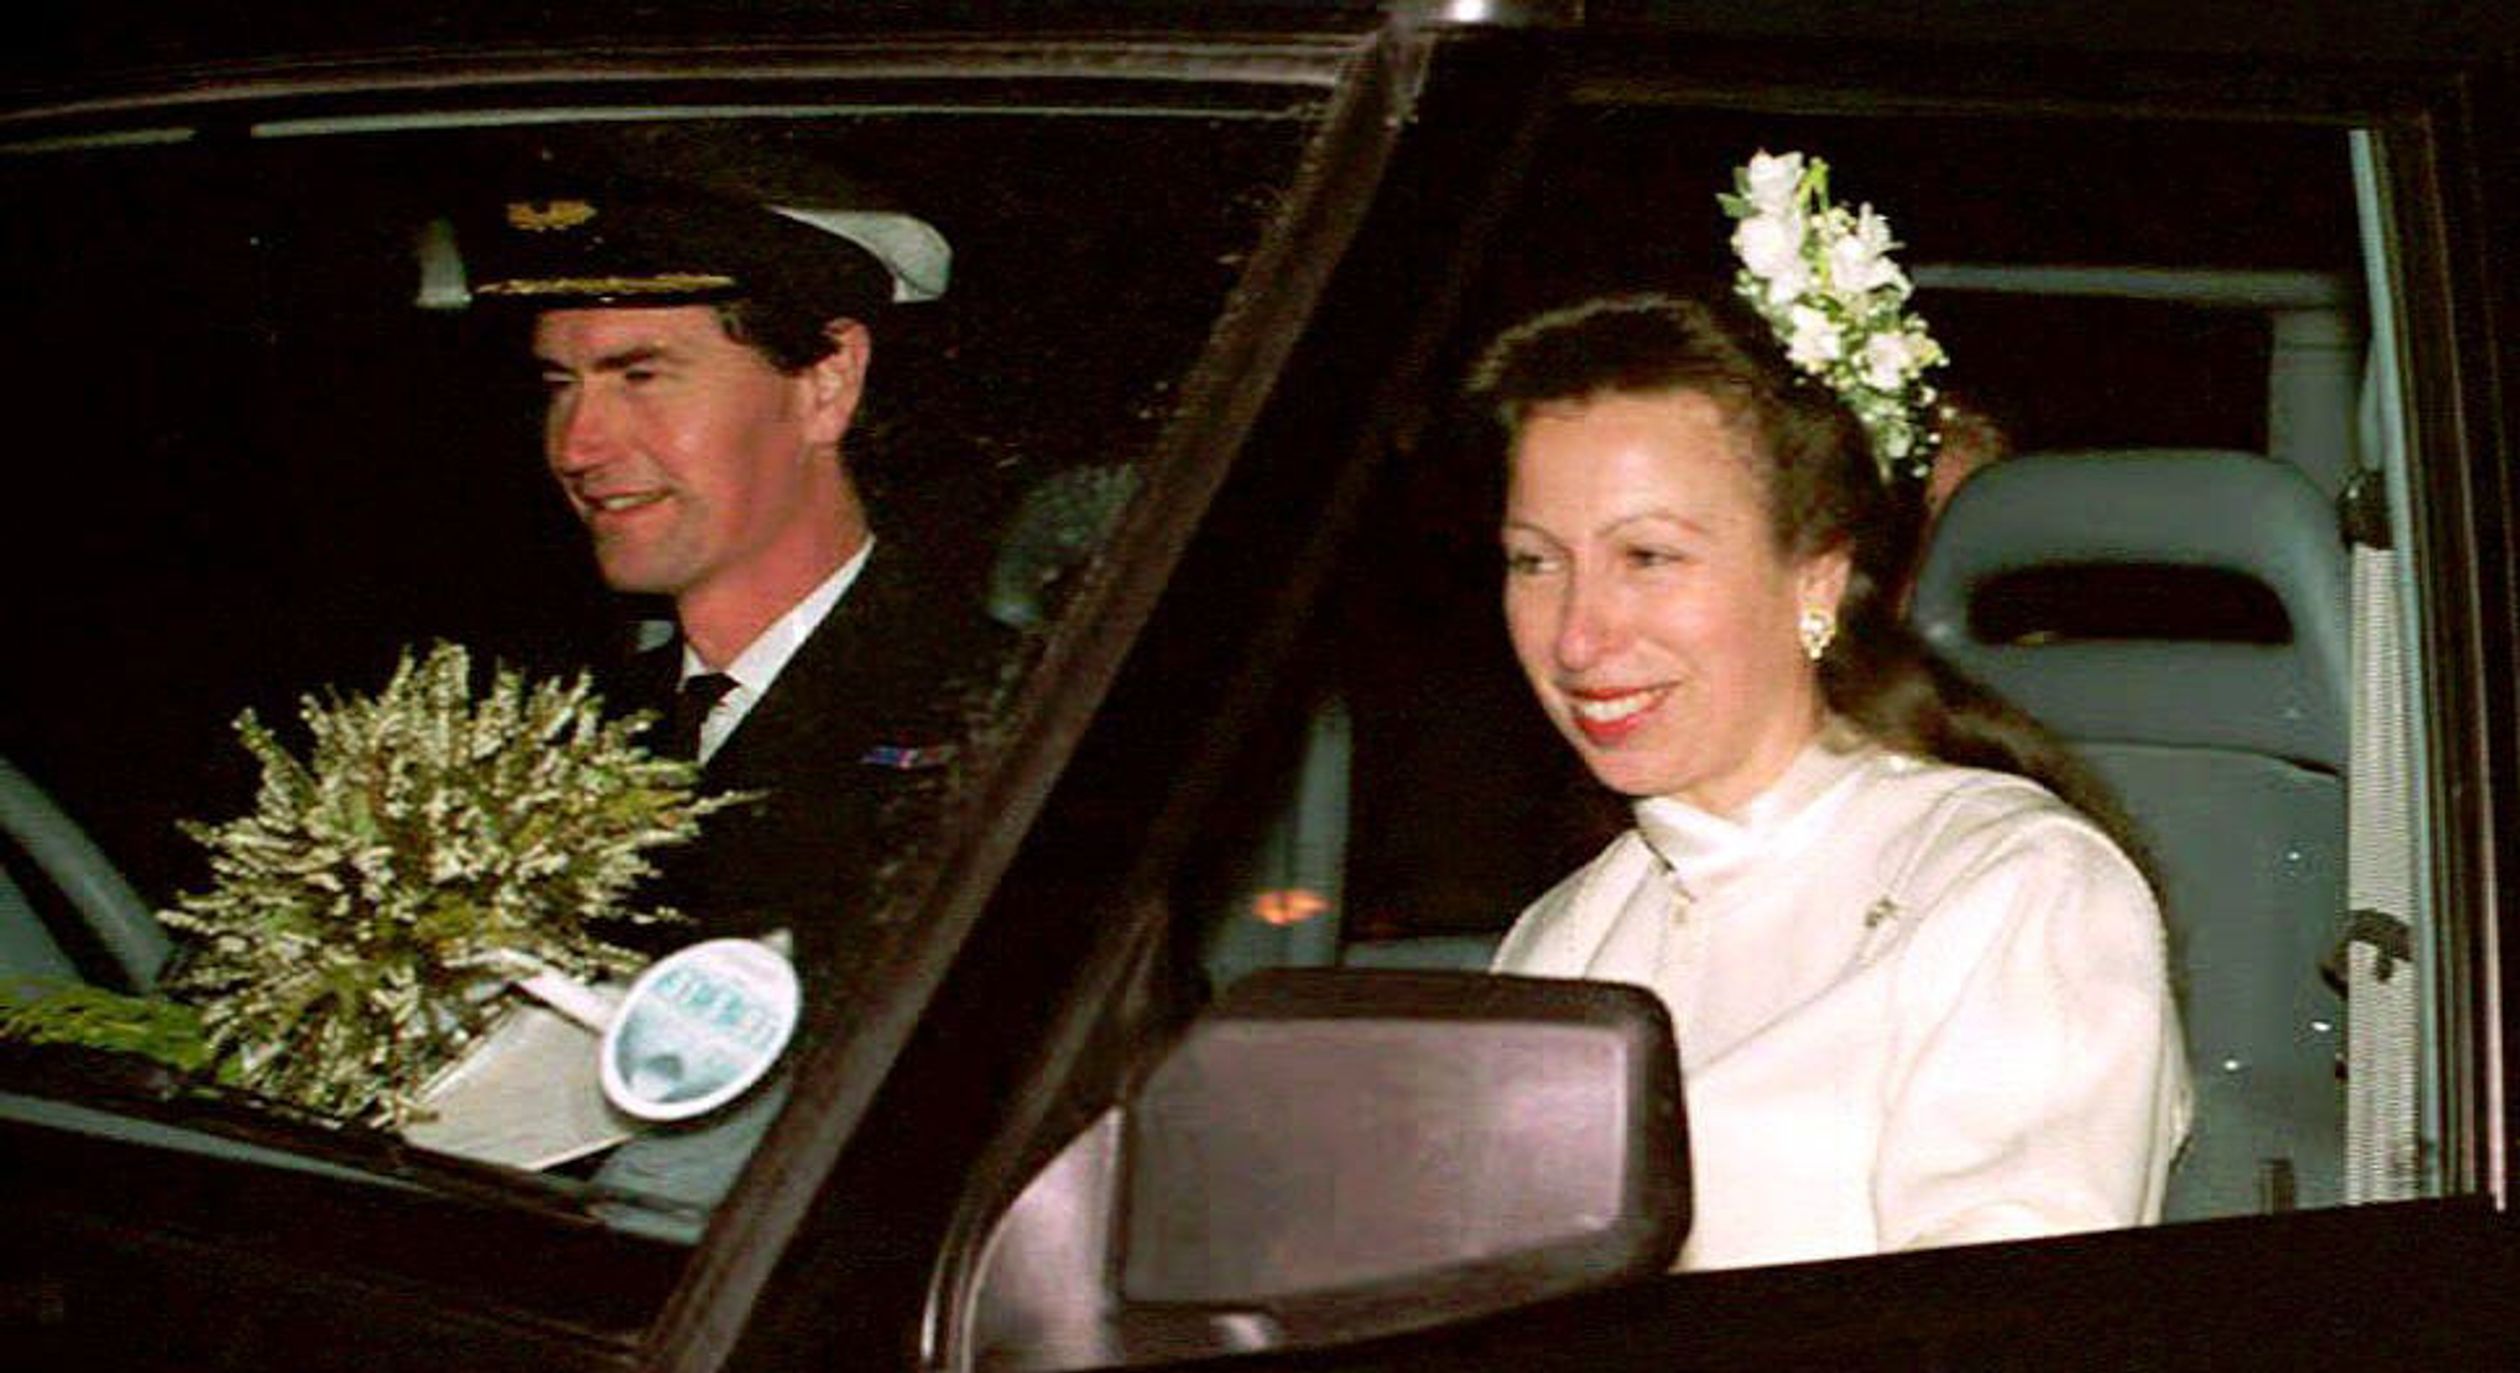 Anne hertrouwt met Tim Laurence in 1992.